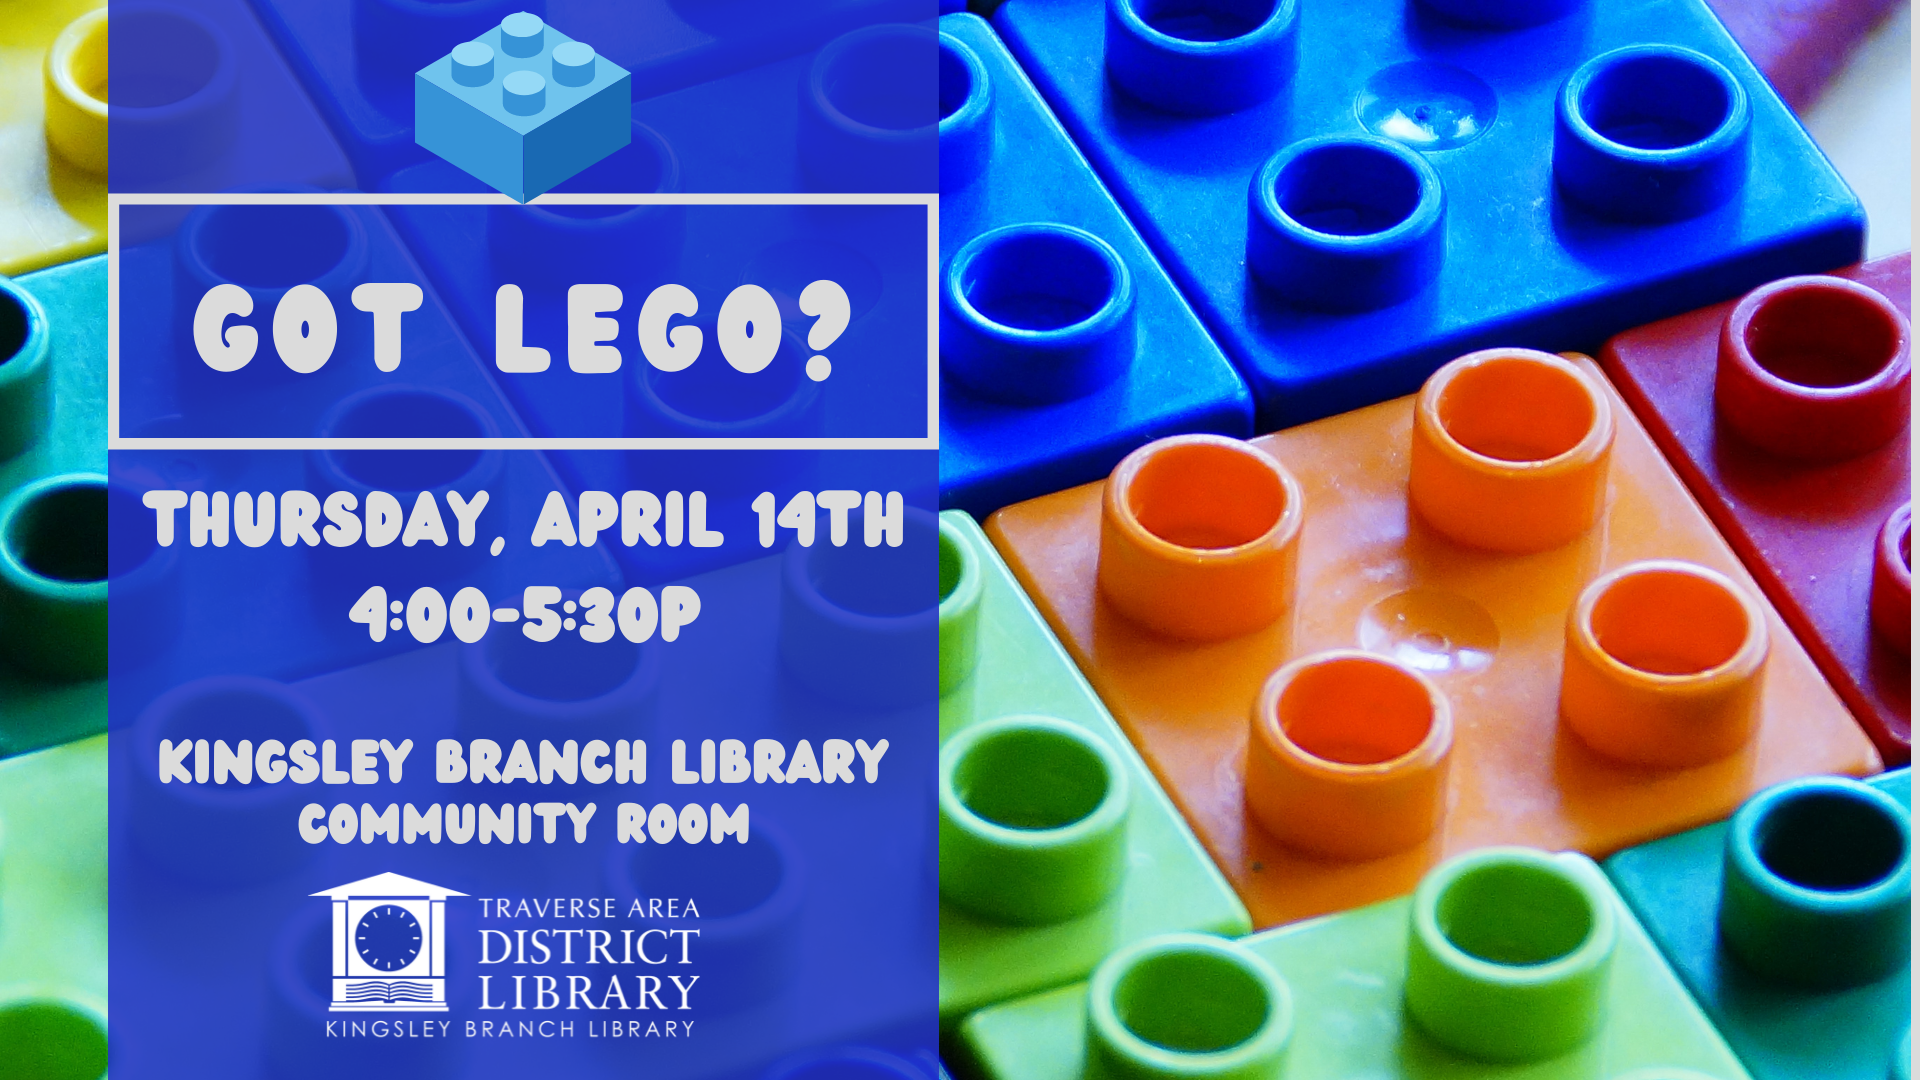 Image with lego blocks in the background in various colors. Text on top says got lego, thursday april 14th 4 pm to 5:30 pm at Kingsley Branch Library Community Room.